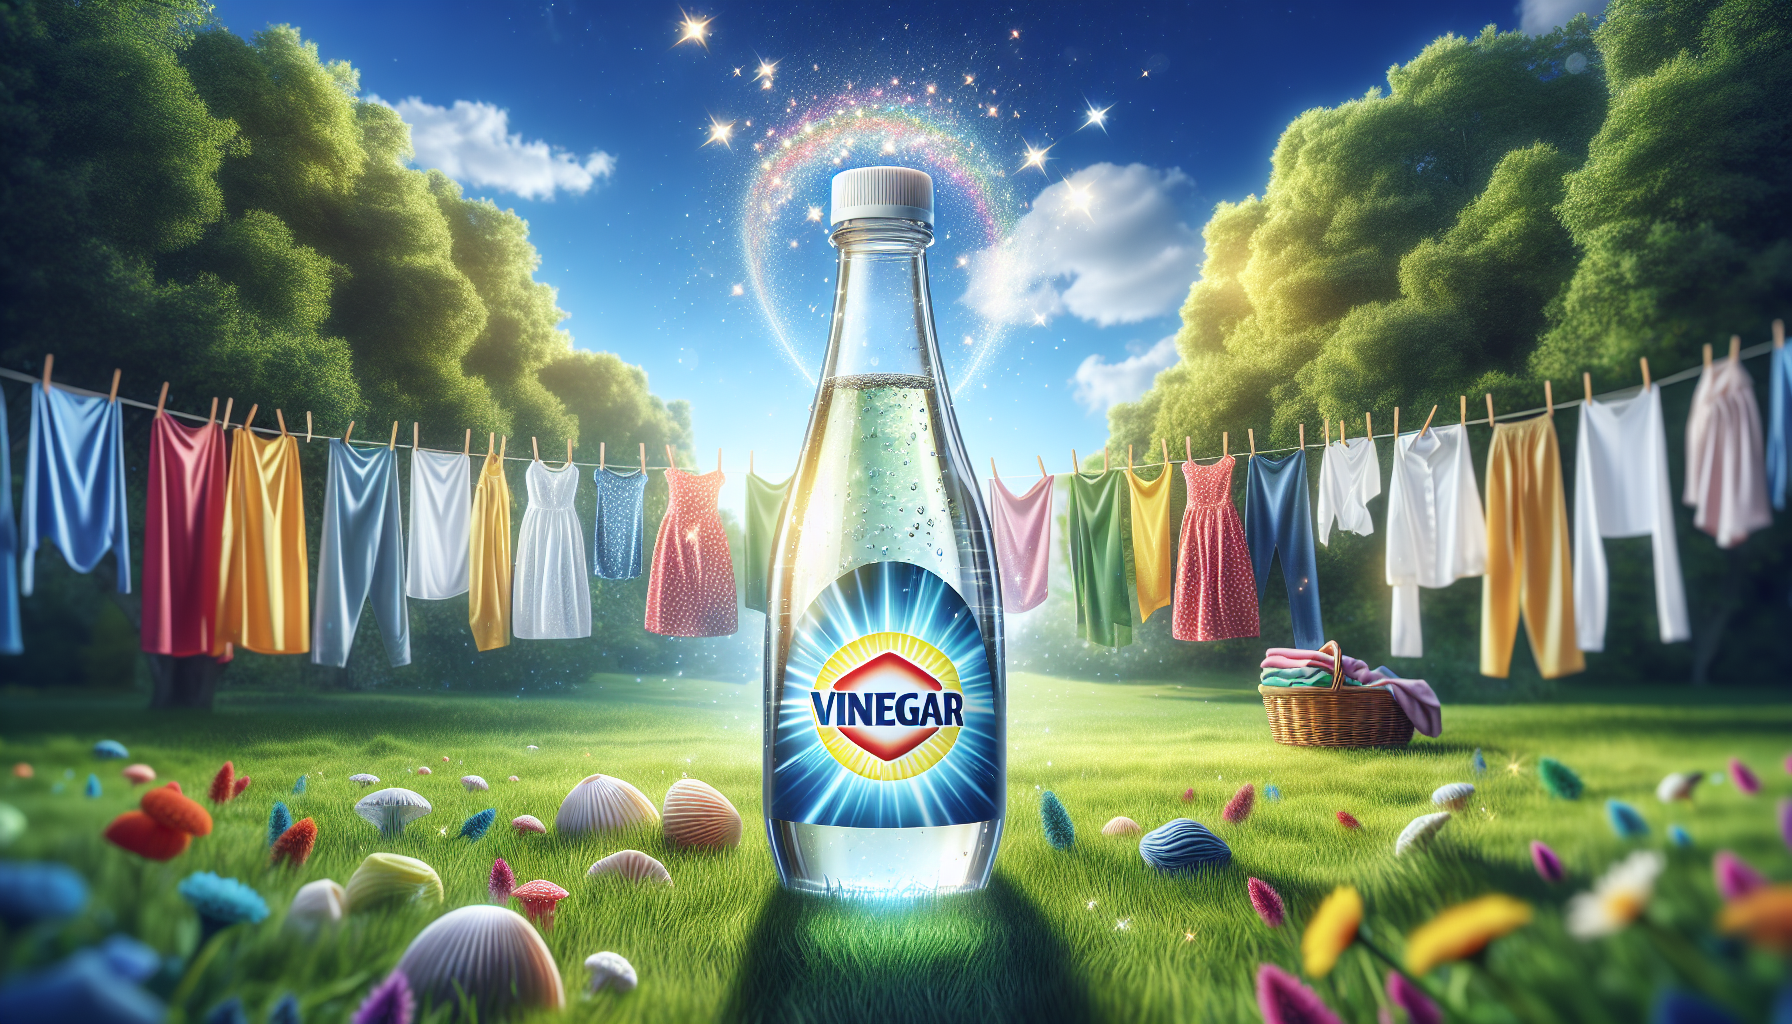 Discover the magic of vinegar for fresh laundry